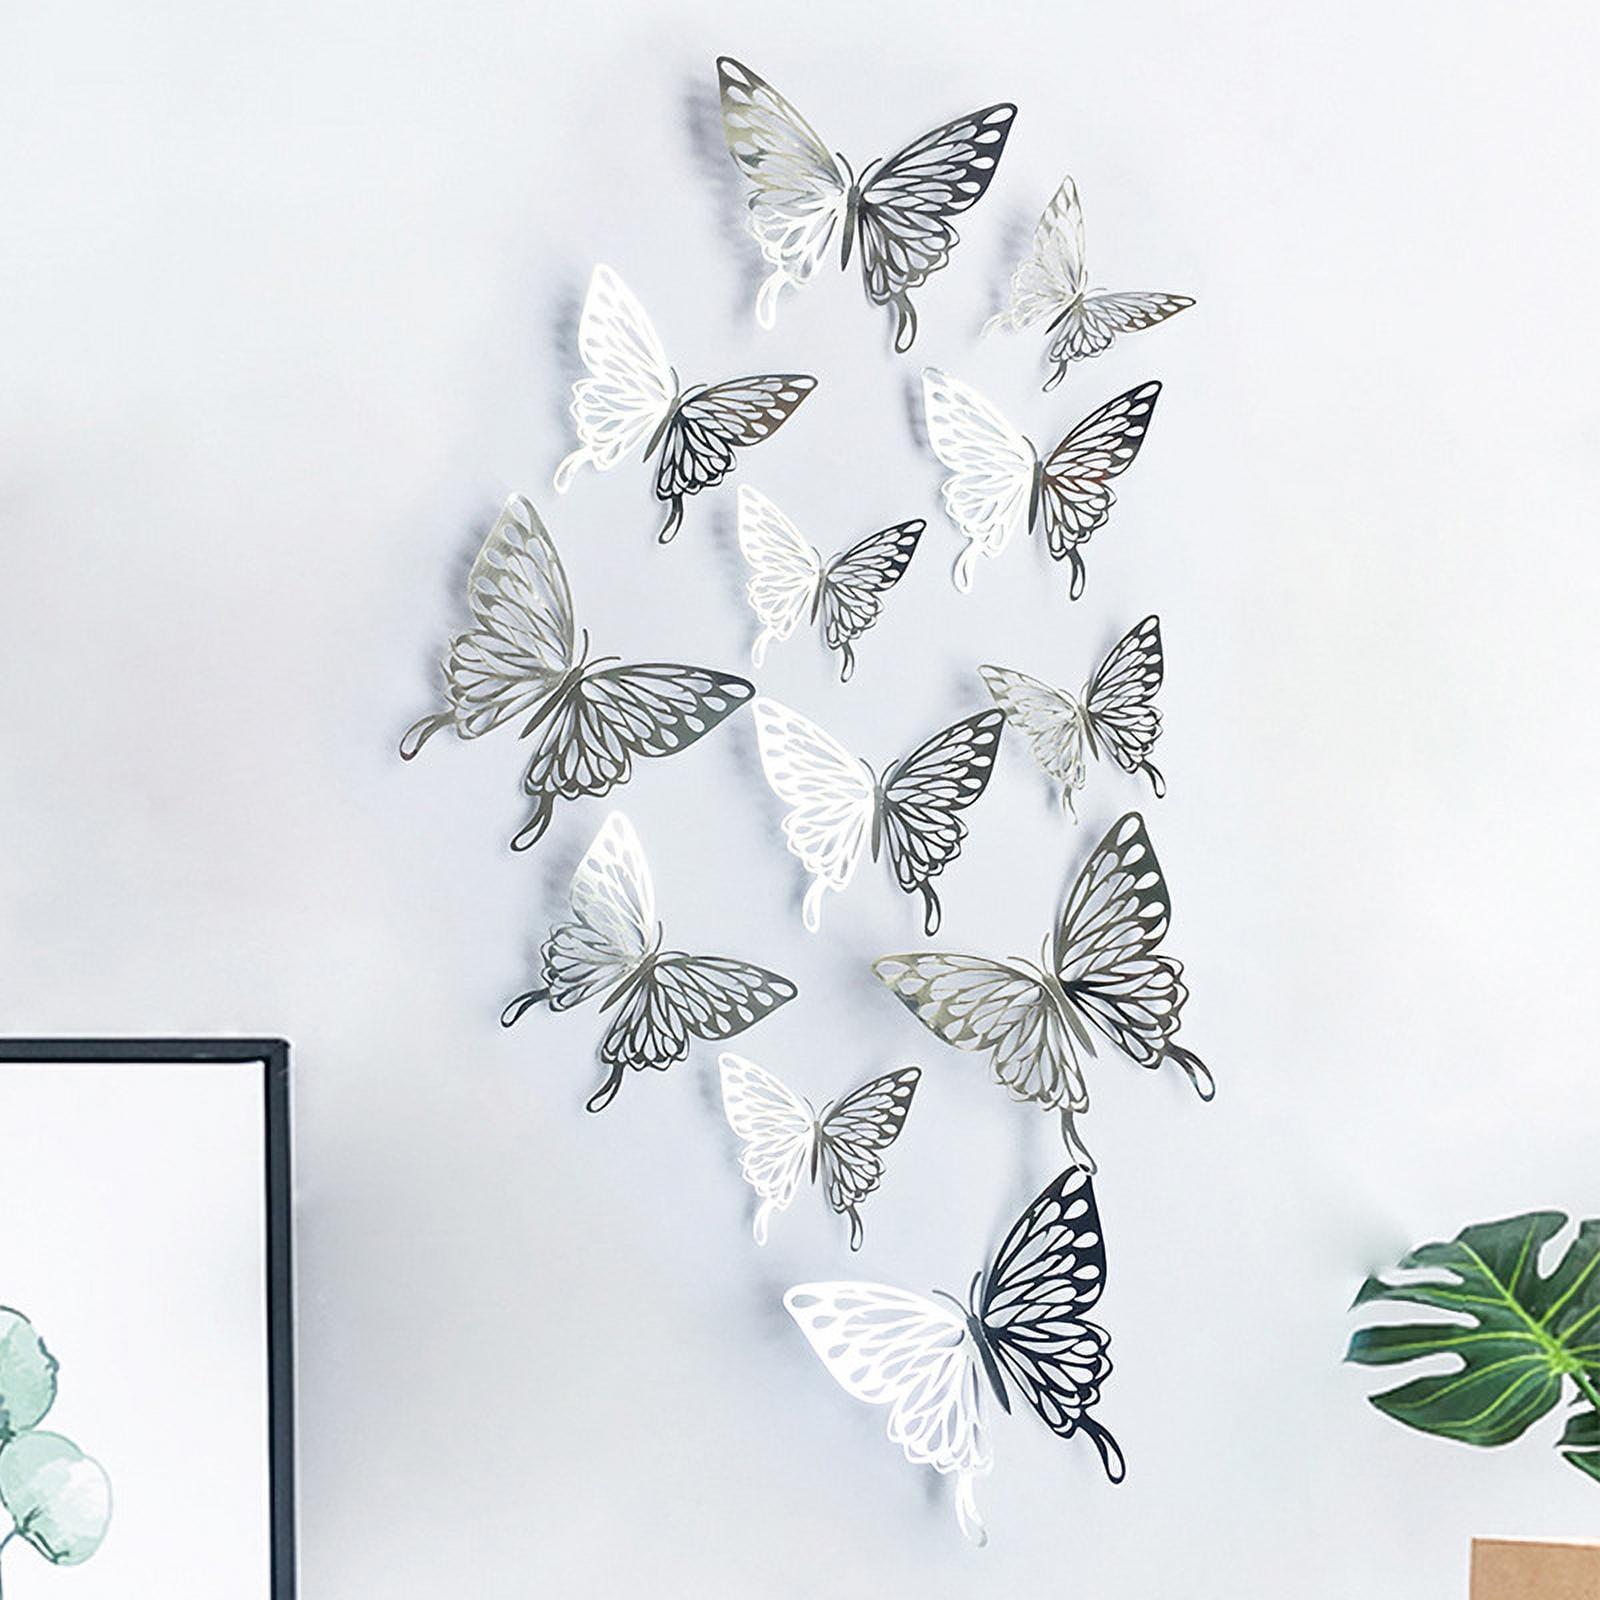 Removable Metallic Wall Sticker Room Mural Decals Decoration for Kids Bedroom Nursery Classroom Party Wedding Decor DIY Gift 3D Butterfly Wall Stickers 48 Pcs 4 Styles 3 Sizes Rose Gold 